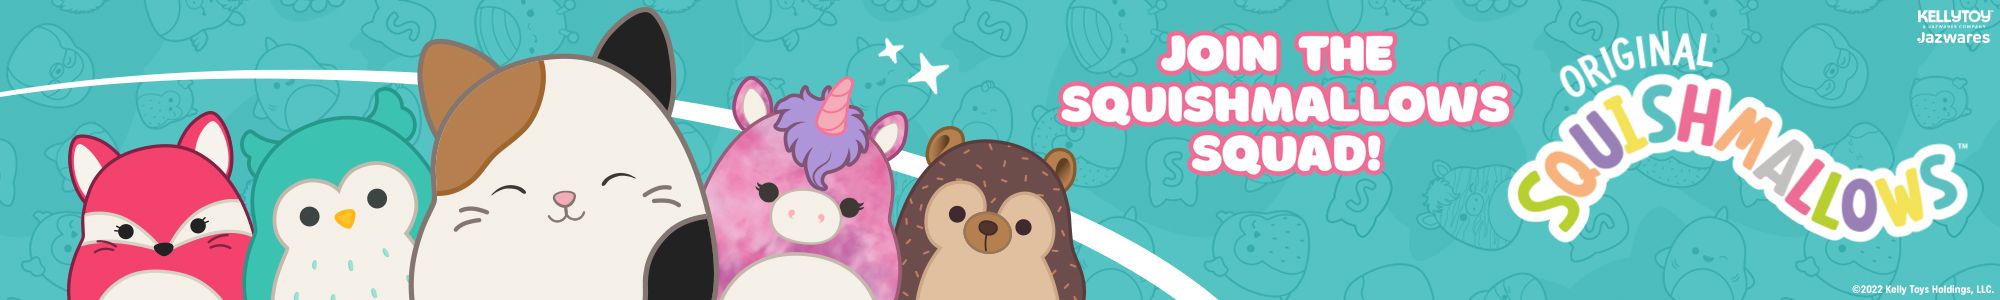 Squishmallows_Entertainer_Banners_Dec2021_v3Brand Page Top Banner.jpg